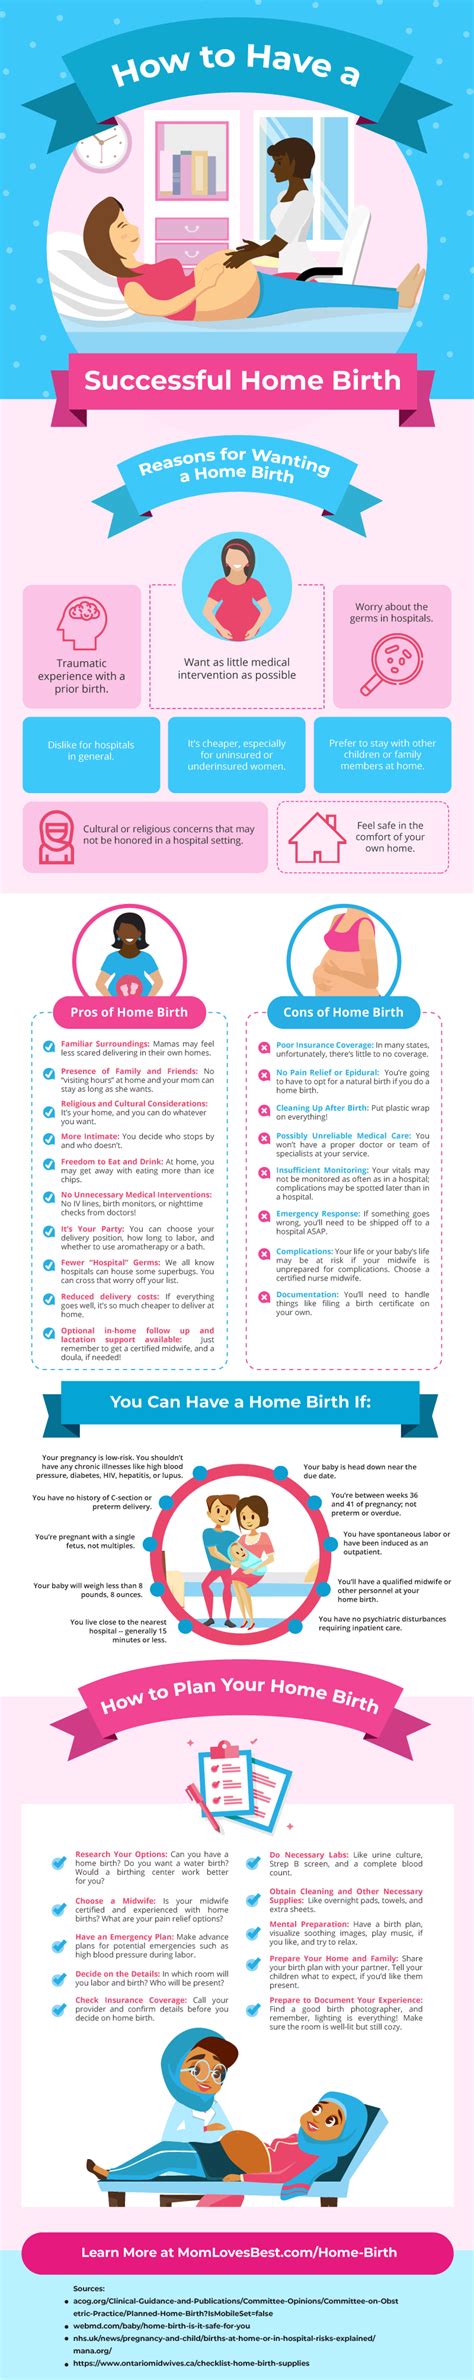 Home Birth Vs Hospital Birth Pros And Cons Of Home Birth